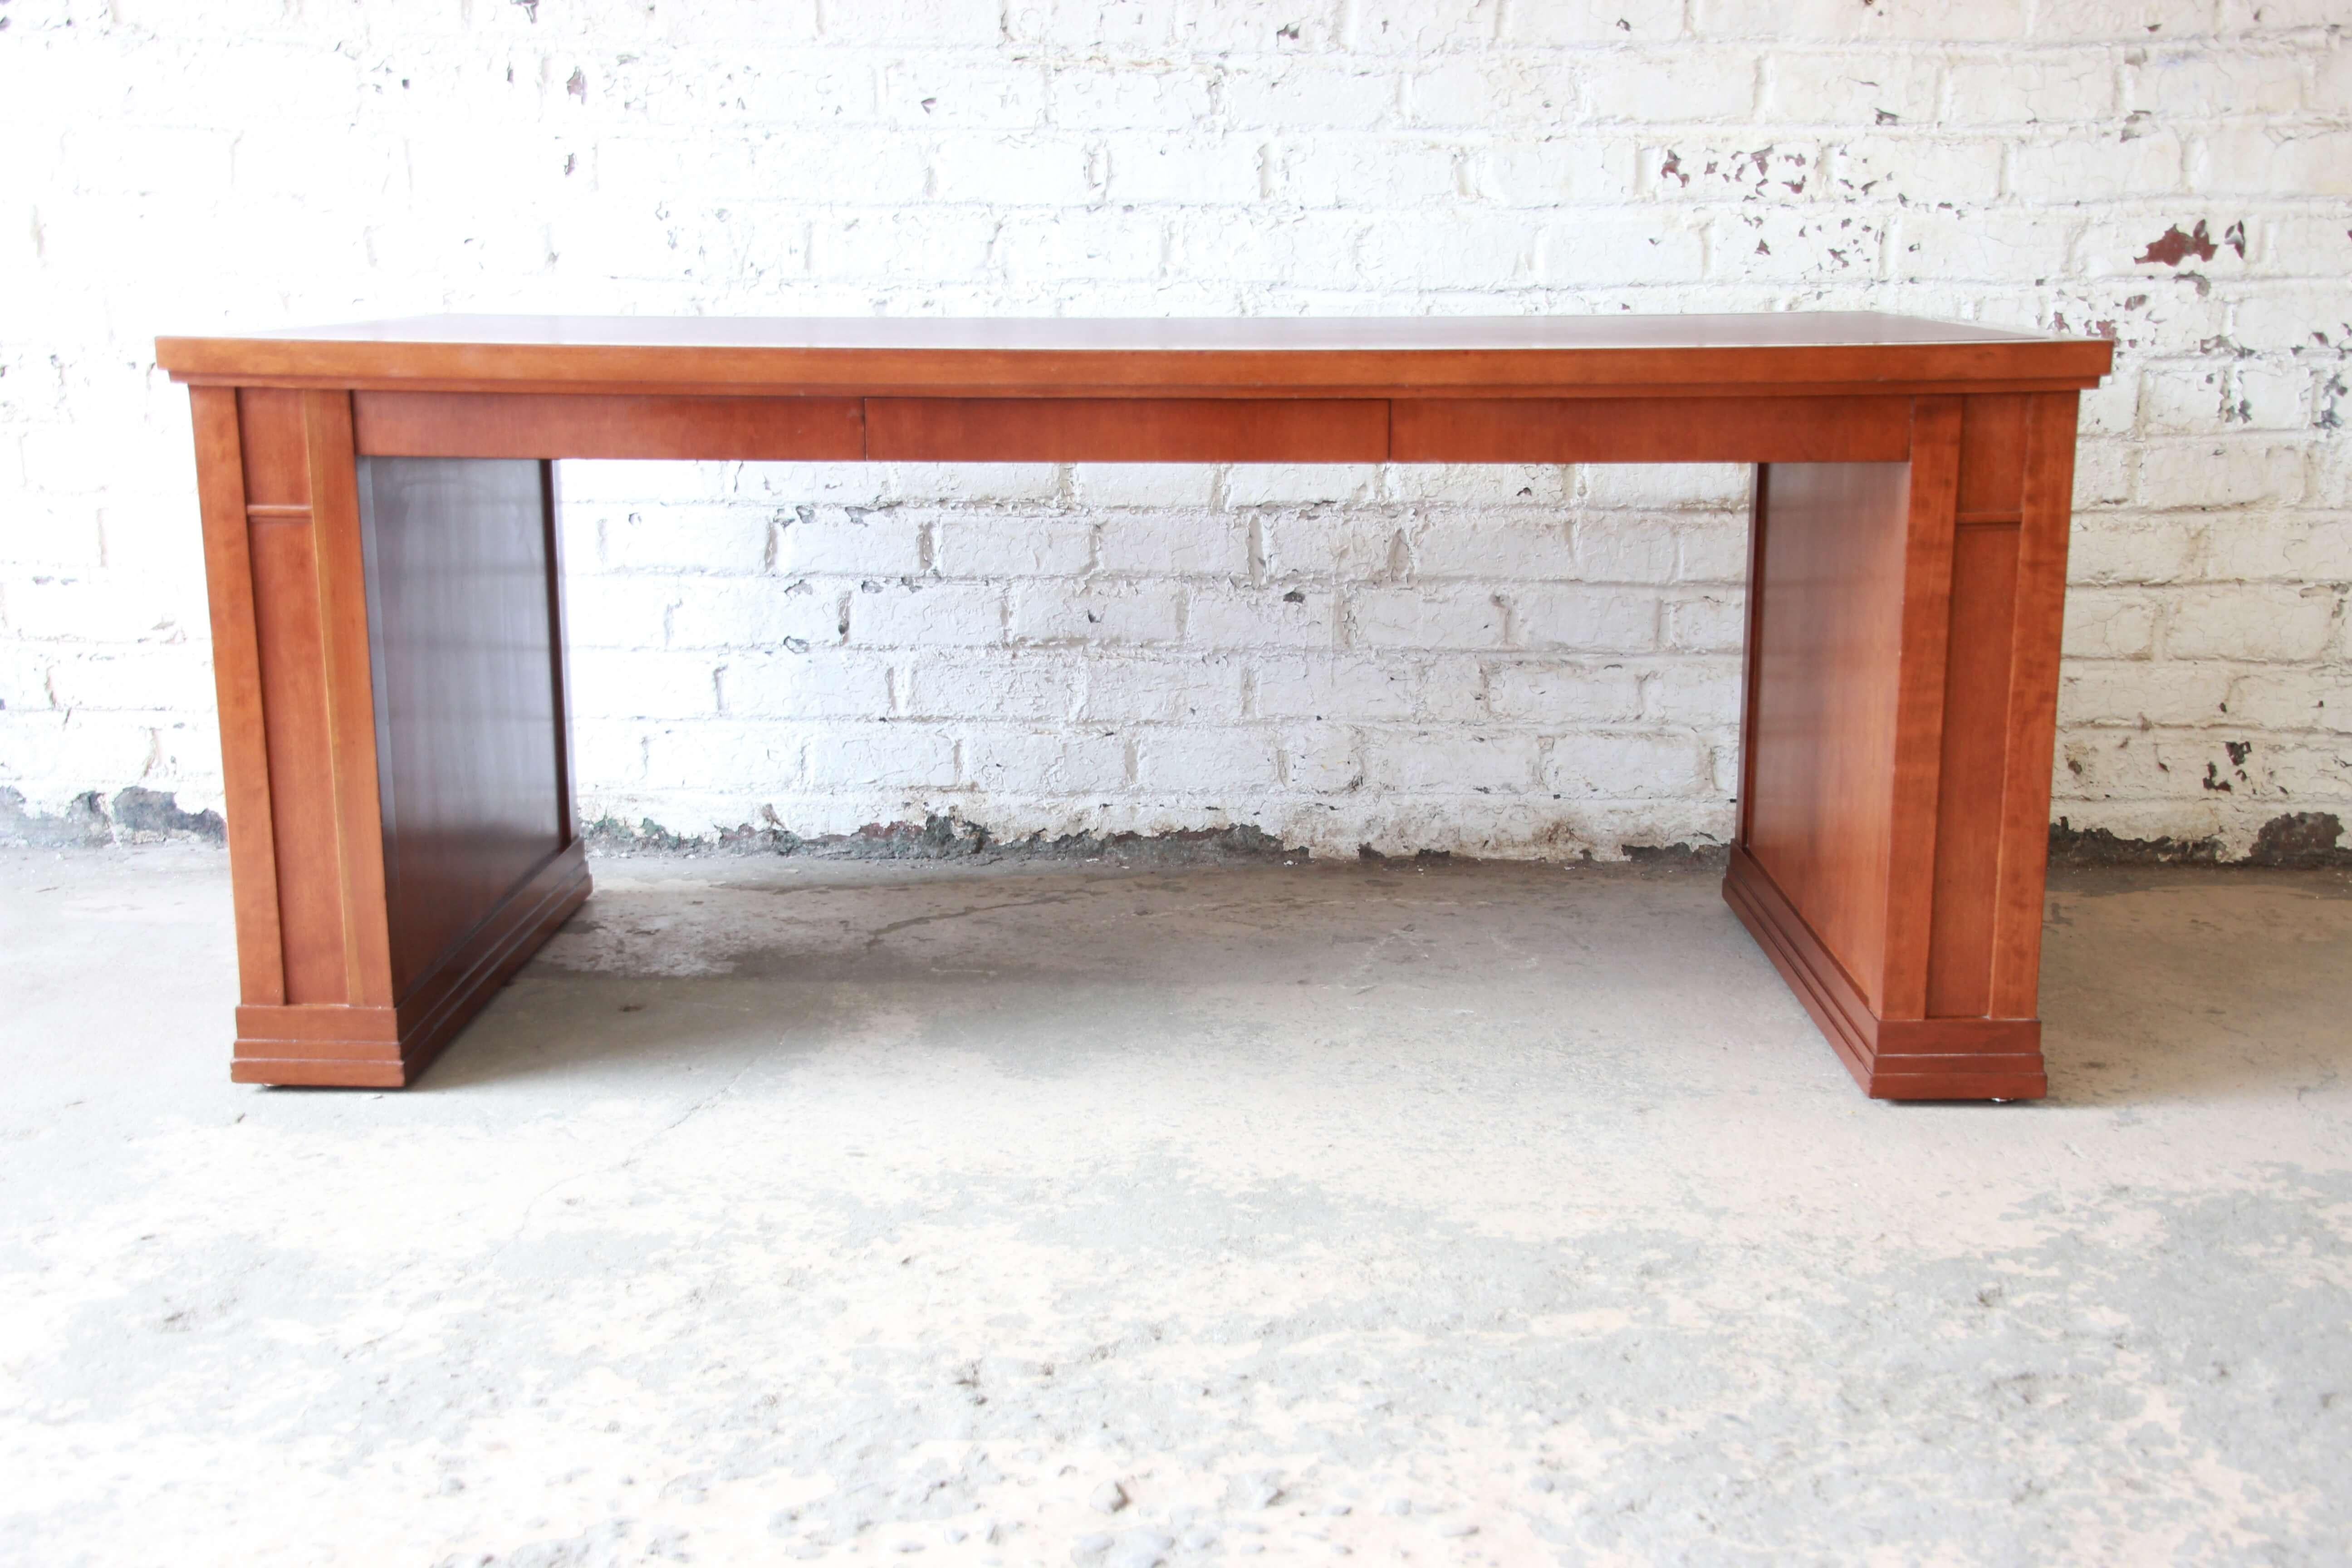 Offering a very nice and rare Dunbar cherry leather top desk or library table. The desk has a nice Craftsman/Frank Lloyd Wright style in a simple and elegant design. The top has a burgundy leather top with a substantial writing surface. The centre